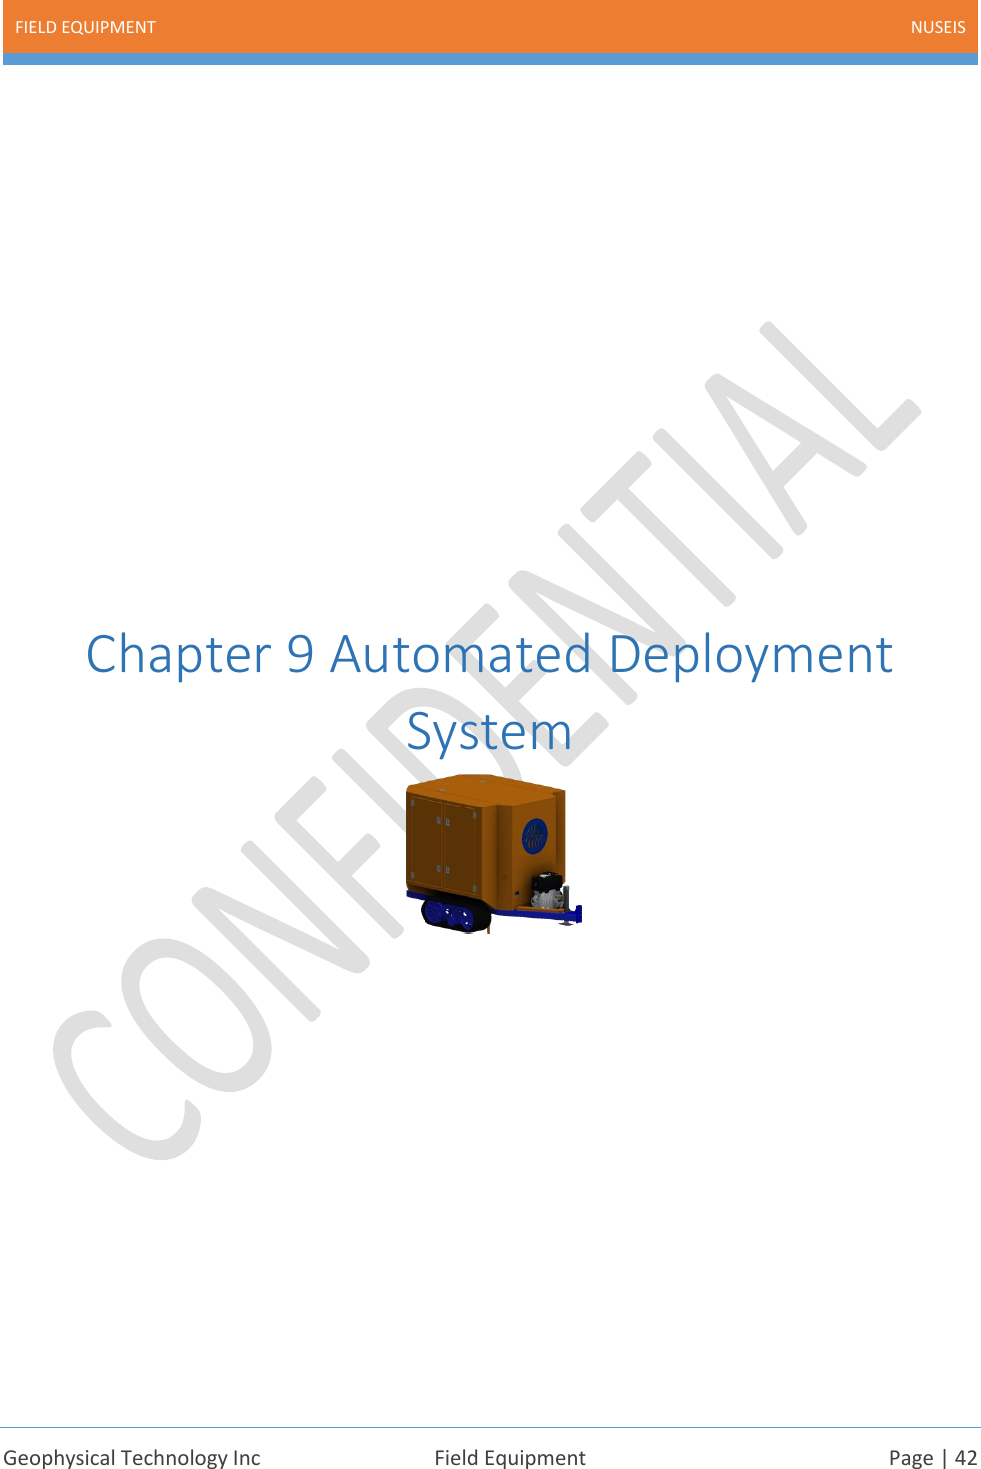 FIELD EQUIPMENT NUSEIS    Geophysical Technology Inc  Field Equipment  Page | 42             Chapter 9 Automated Deployment System              